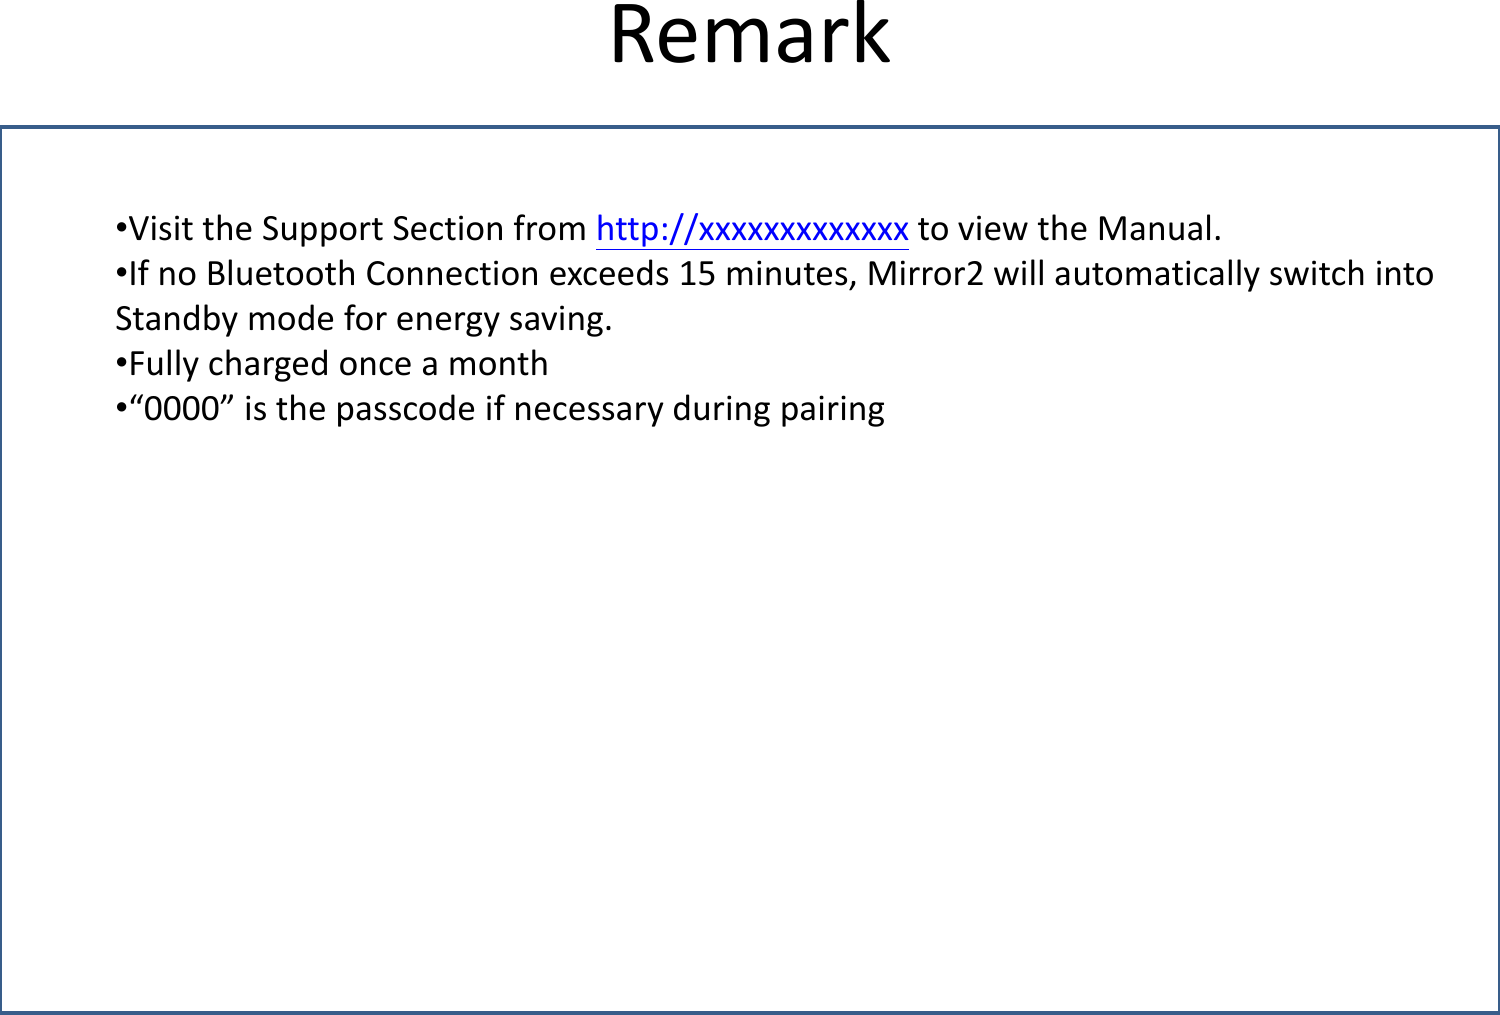 Remark •Visit the Support Section from http://xxxxxxxxxxxxx to view the Manual. •If no Bluetooth Connection exceeds 15 minutes, Mirror2 will automatically switch into Standby mode for energy saving. •Fully charged once a month •“0000” is the passcode if necessary during pairing 